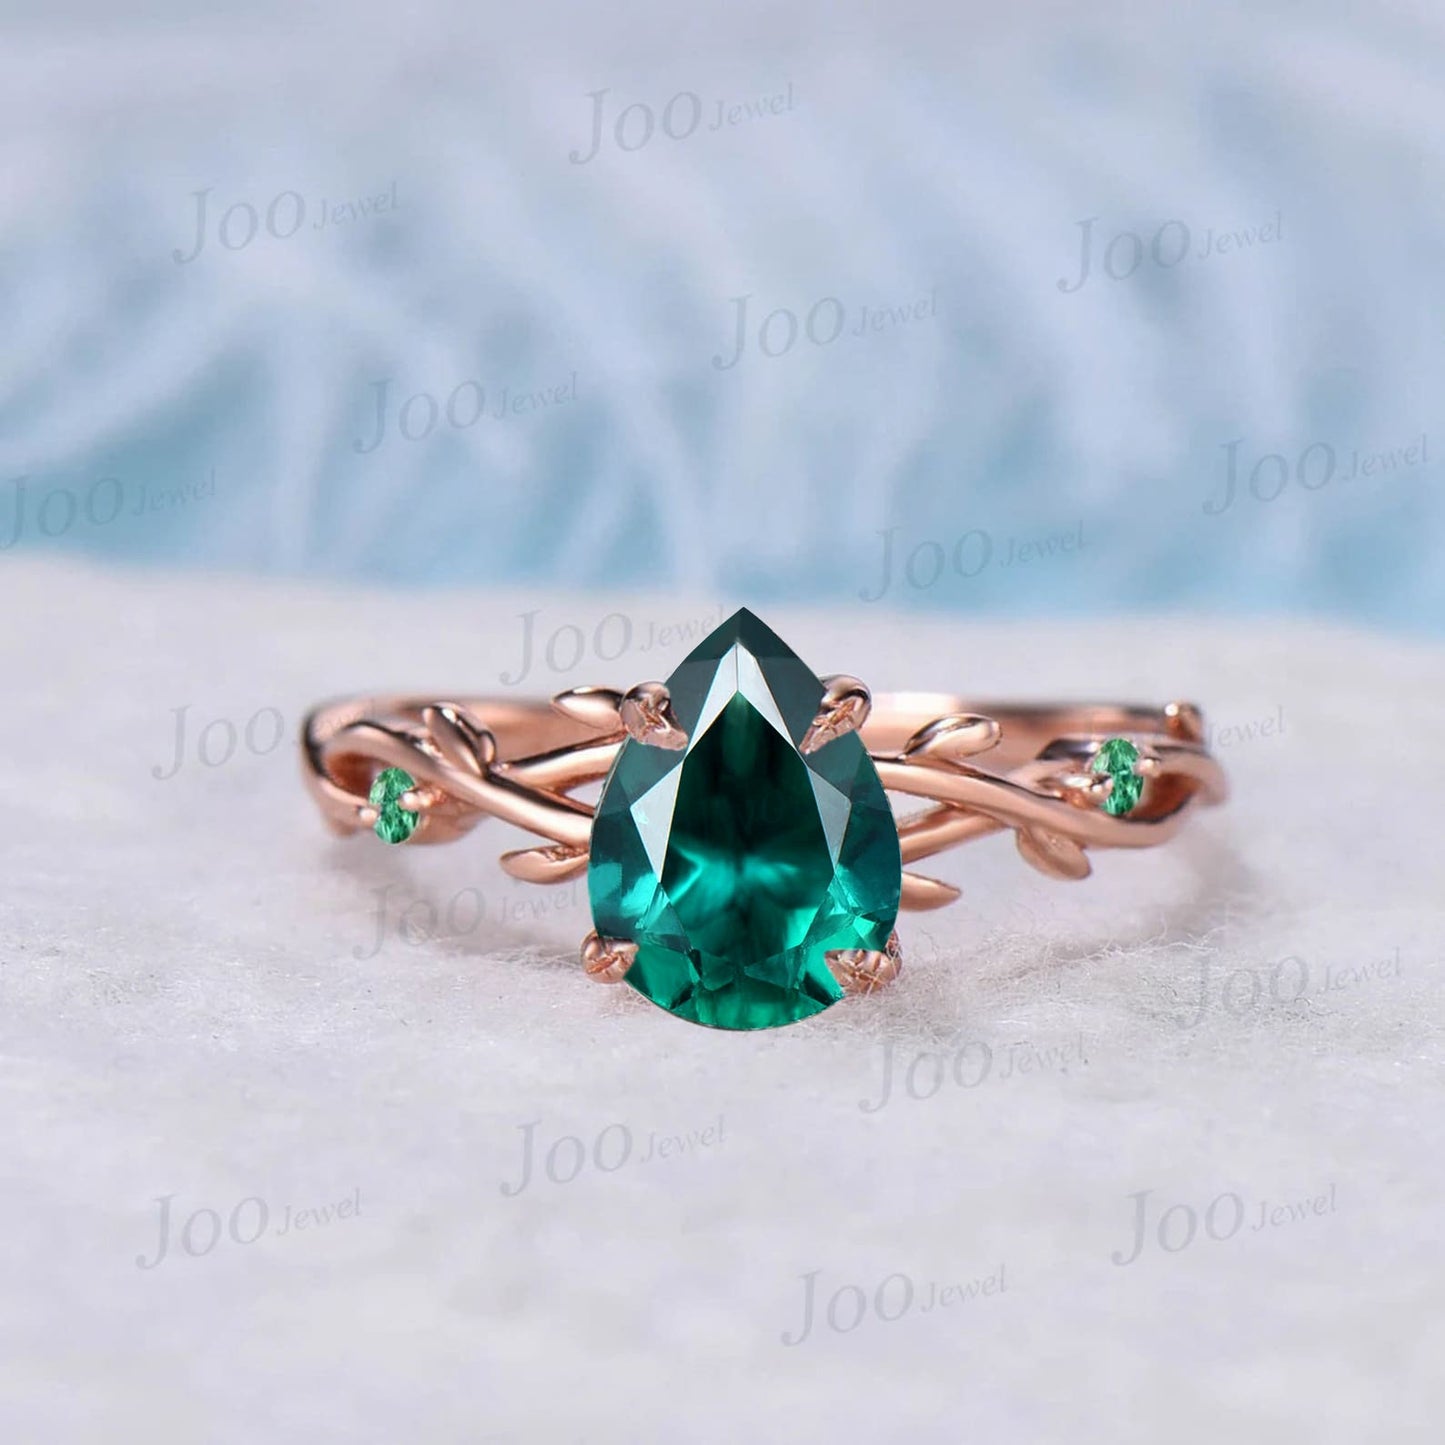 Nature Inspired Pear Shaped Green Emerald Engagement Ring Set 1.25ct Twig Branch Vine Emerald Moss Agate Wedding Band Teardrop Emerald Ring